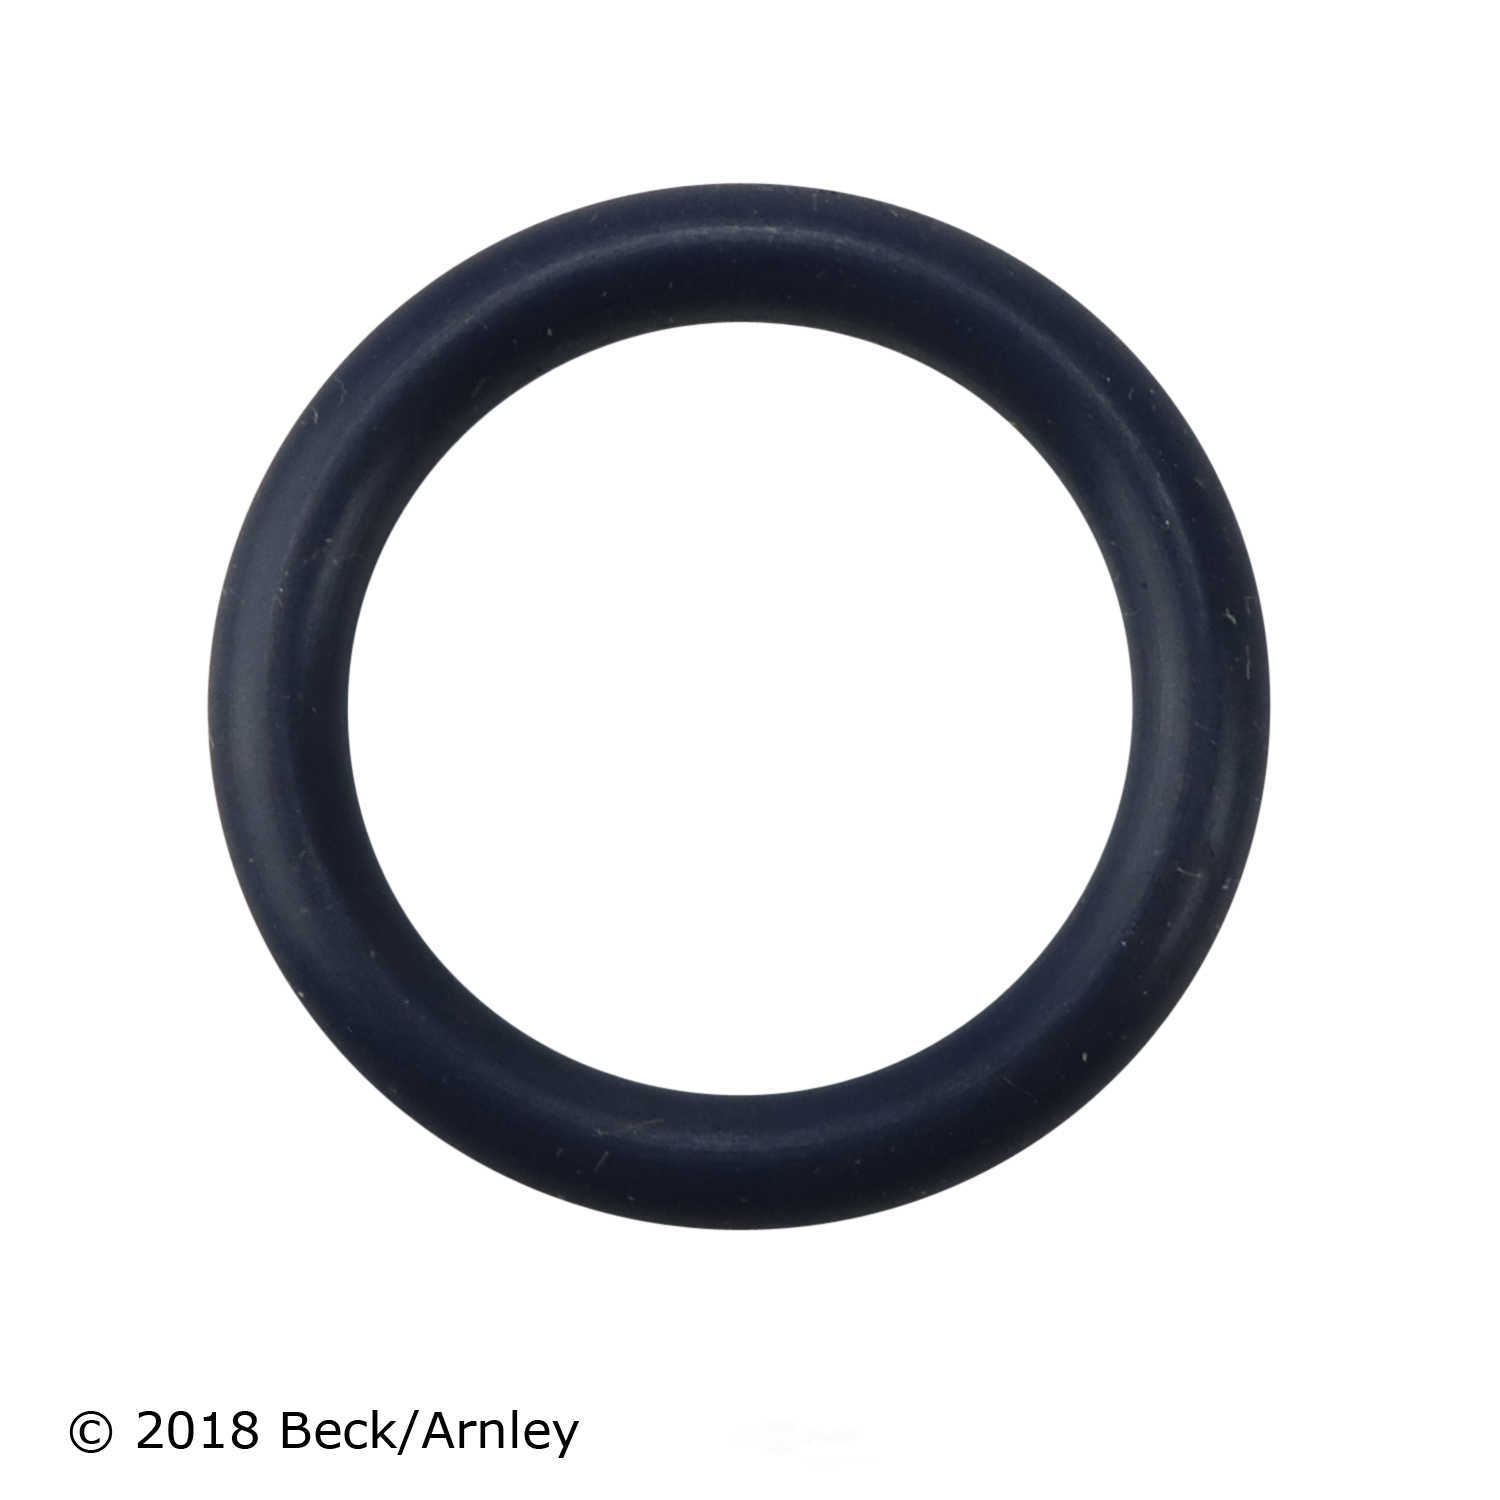 BECK/ARNLEY - Fuel Injection Nozzle O-Ring Kit - BAR 158-0957